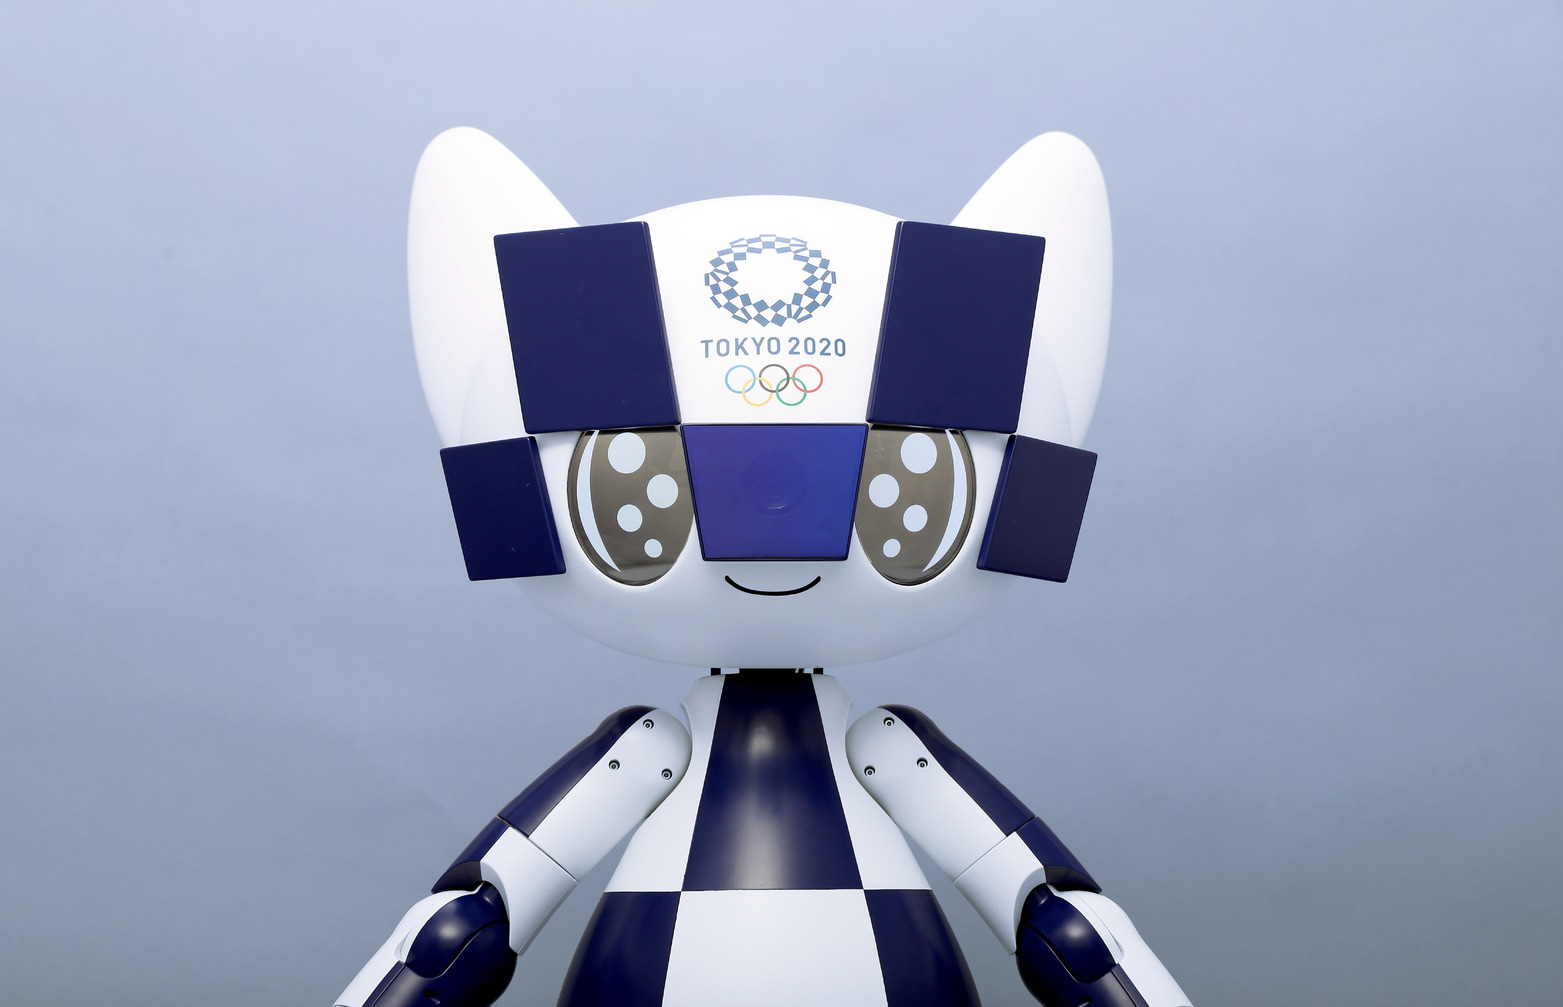 5 Robots You Will Only See at the Tokyo 2020 Olympics